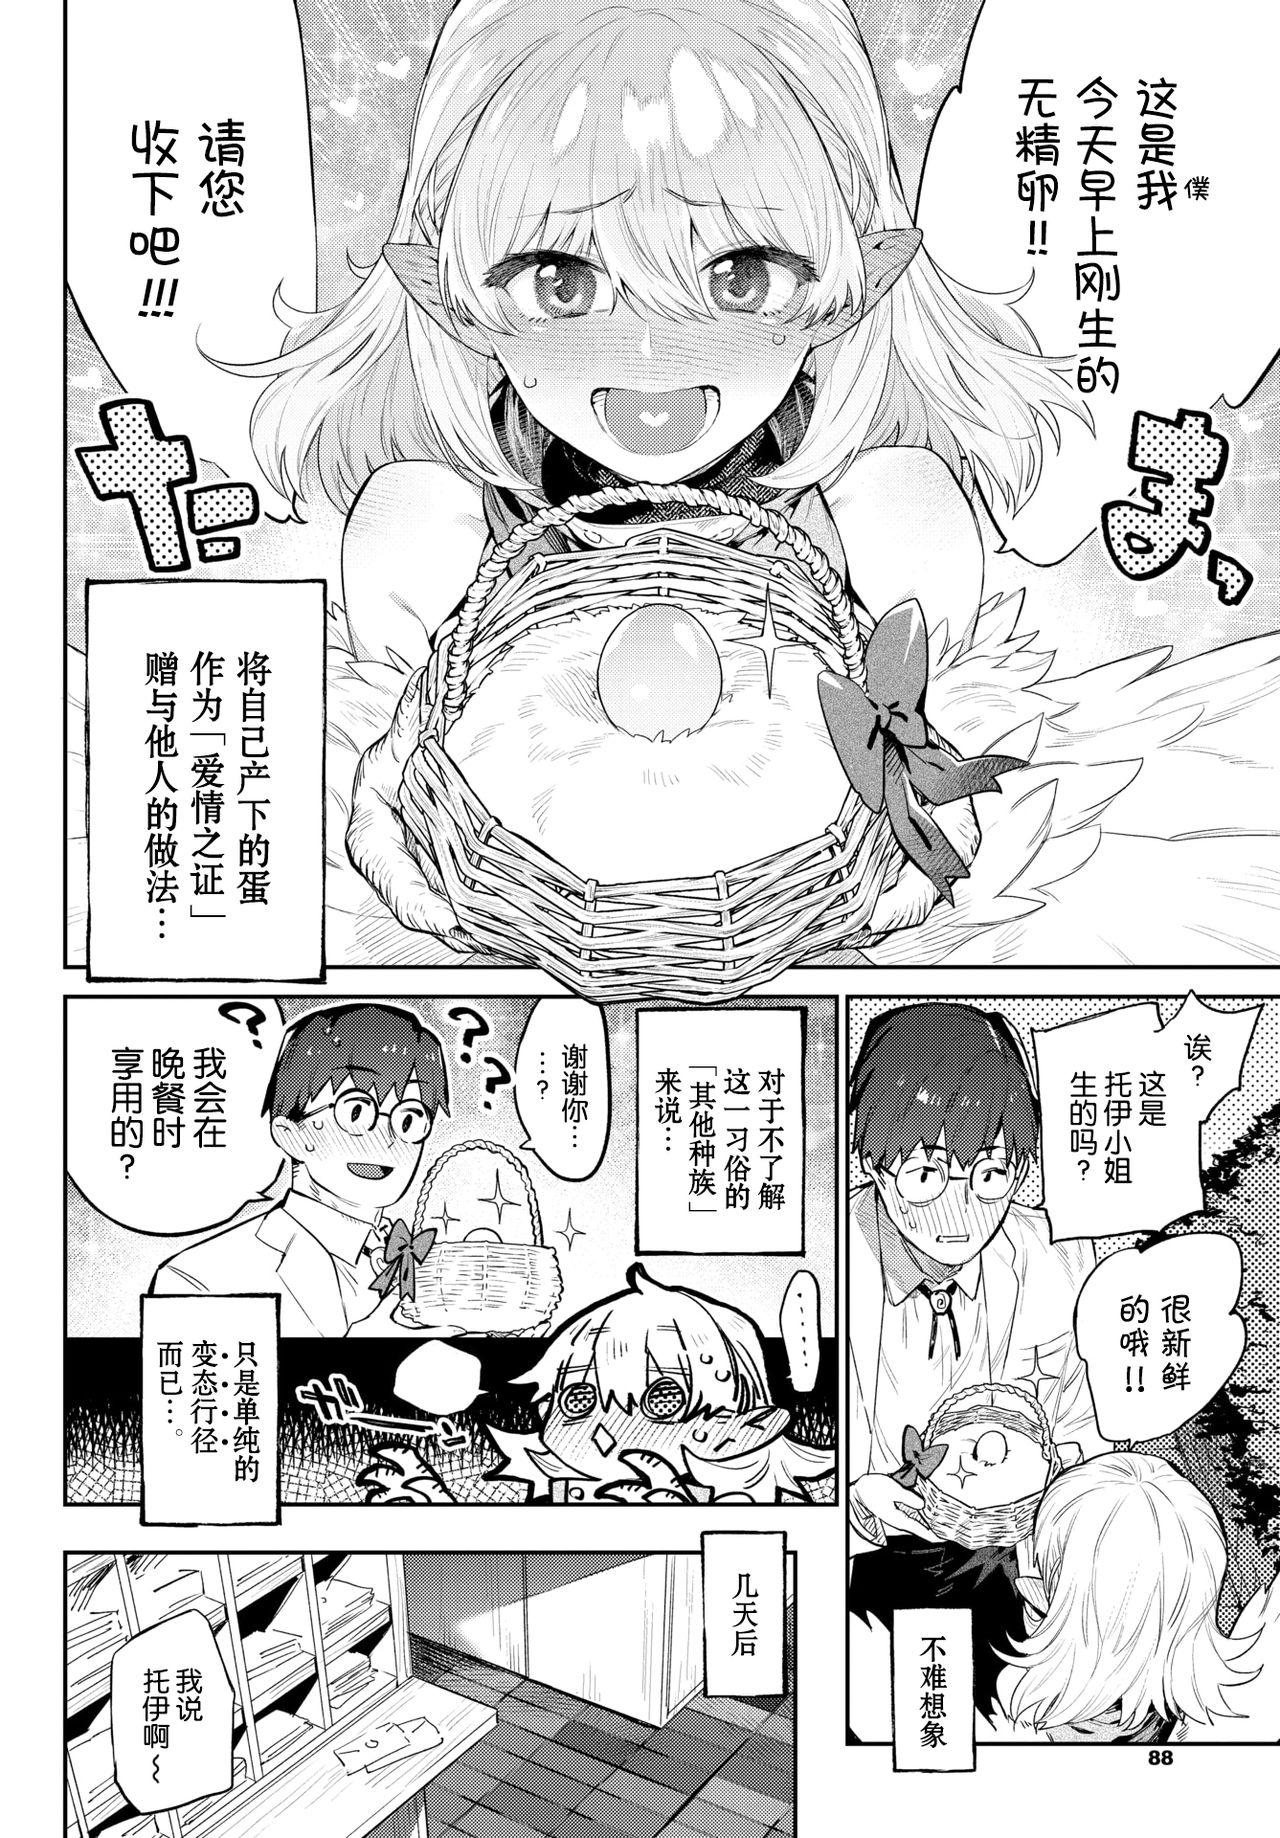 Ihou no Otome - Monster Girls in Another World 125